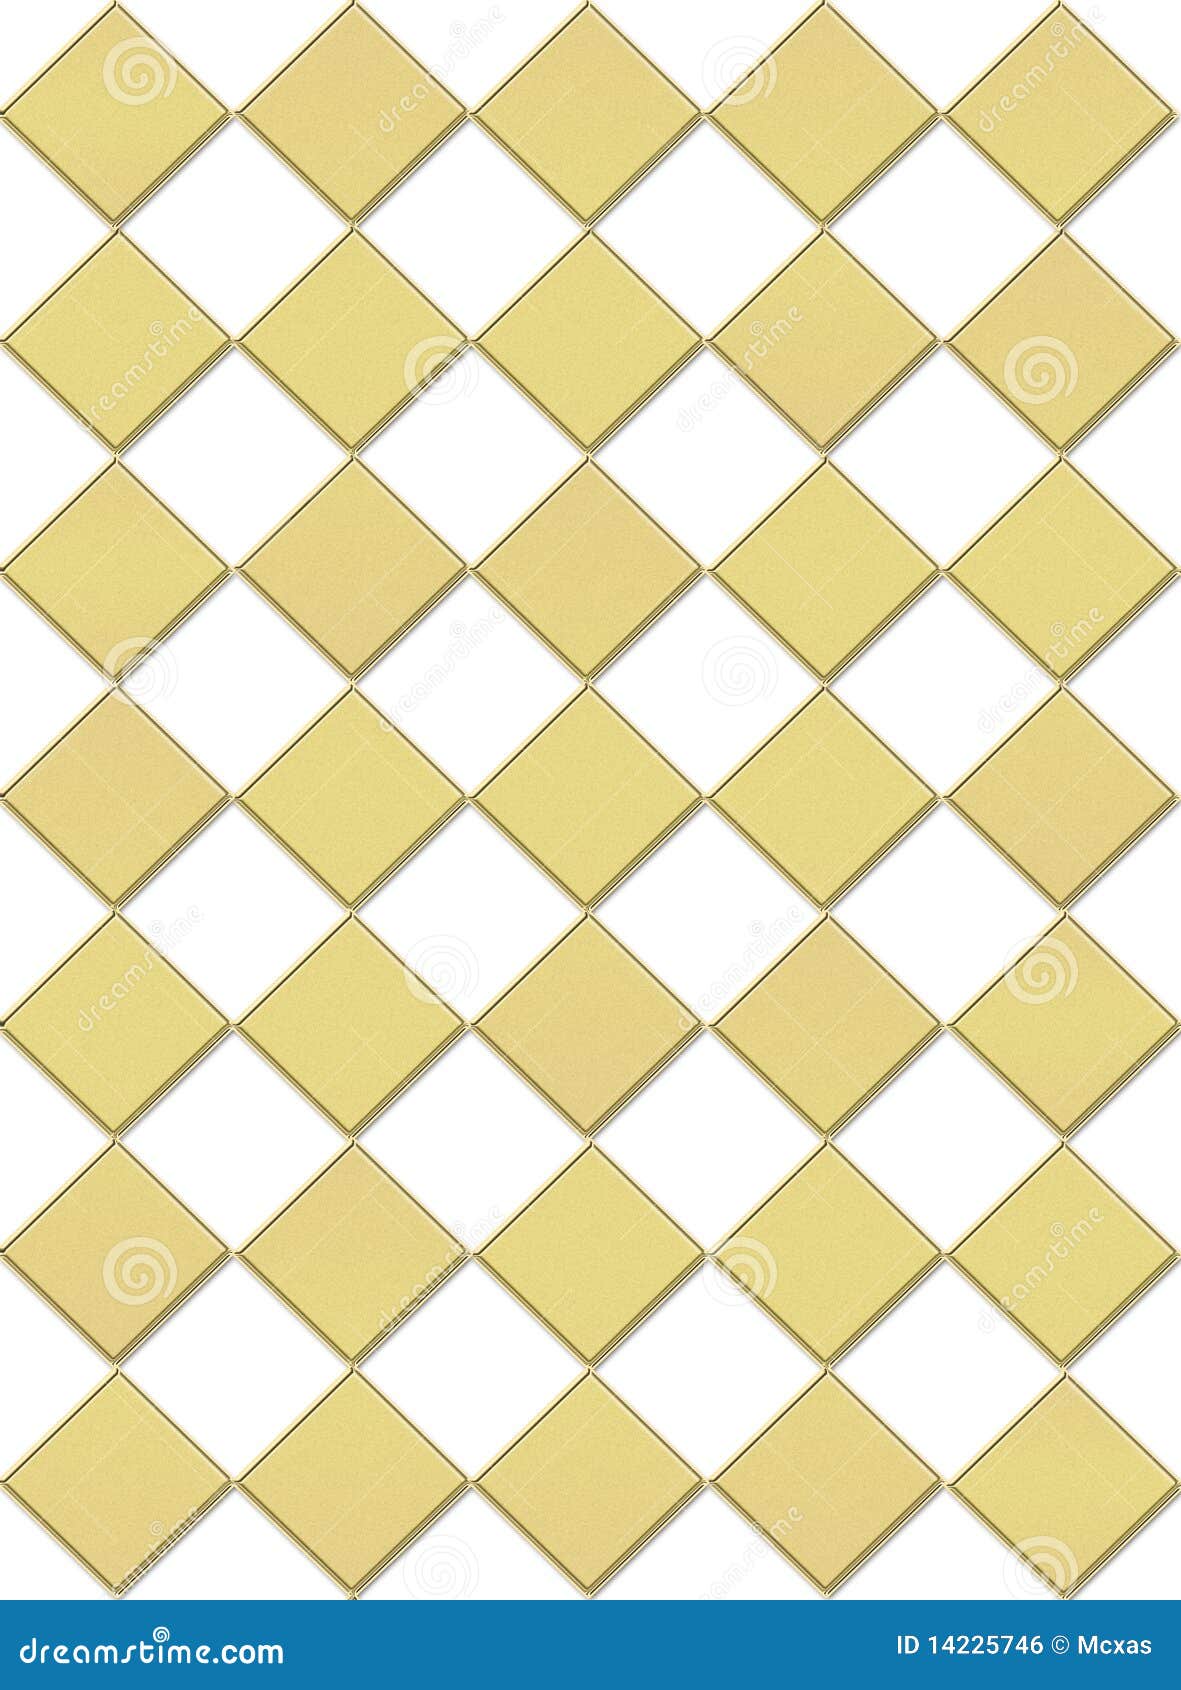 draught-board background in gold